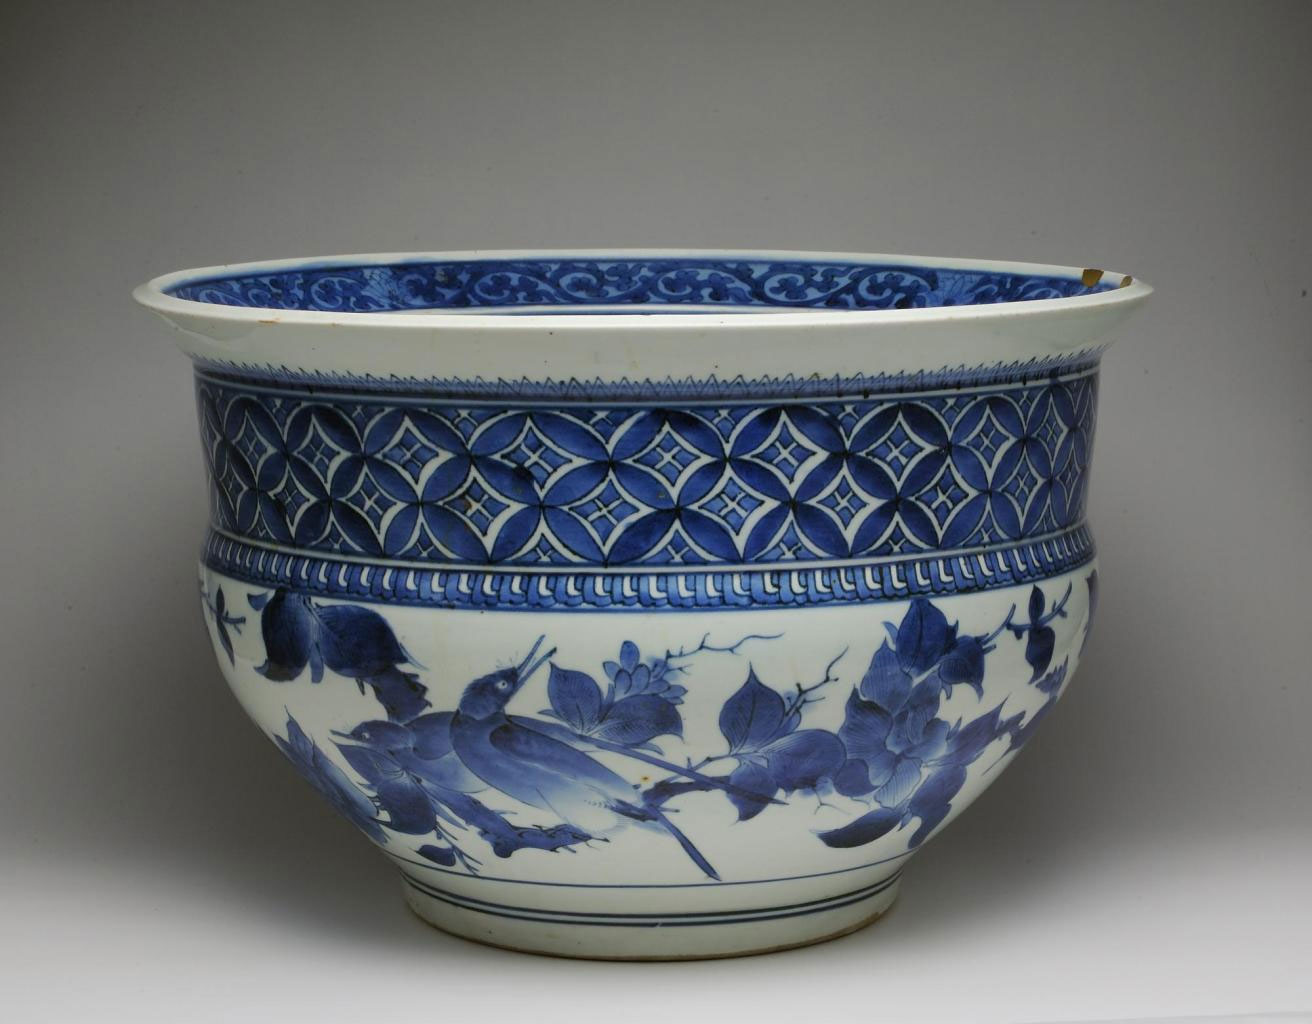 Large fish-bowl of porcelain with underglaze blue decoration of birds on branches and a diamond lozenge pattern above, with gold lacquer repairs to rim: Japan, 1660-80.